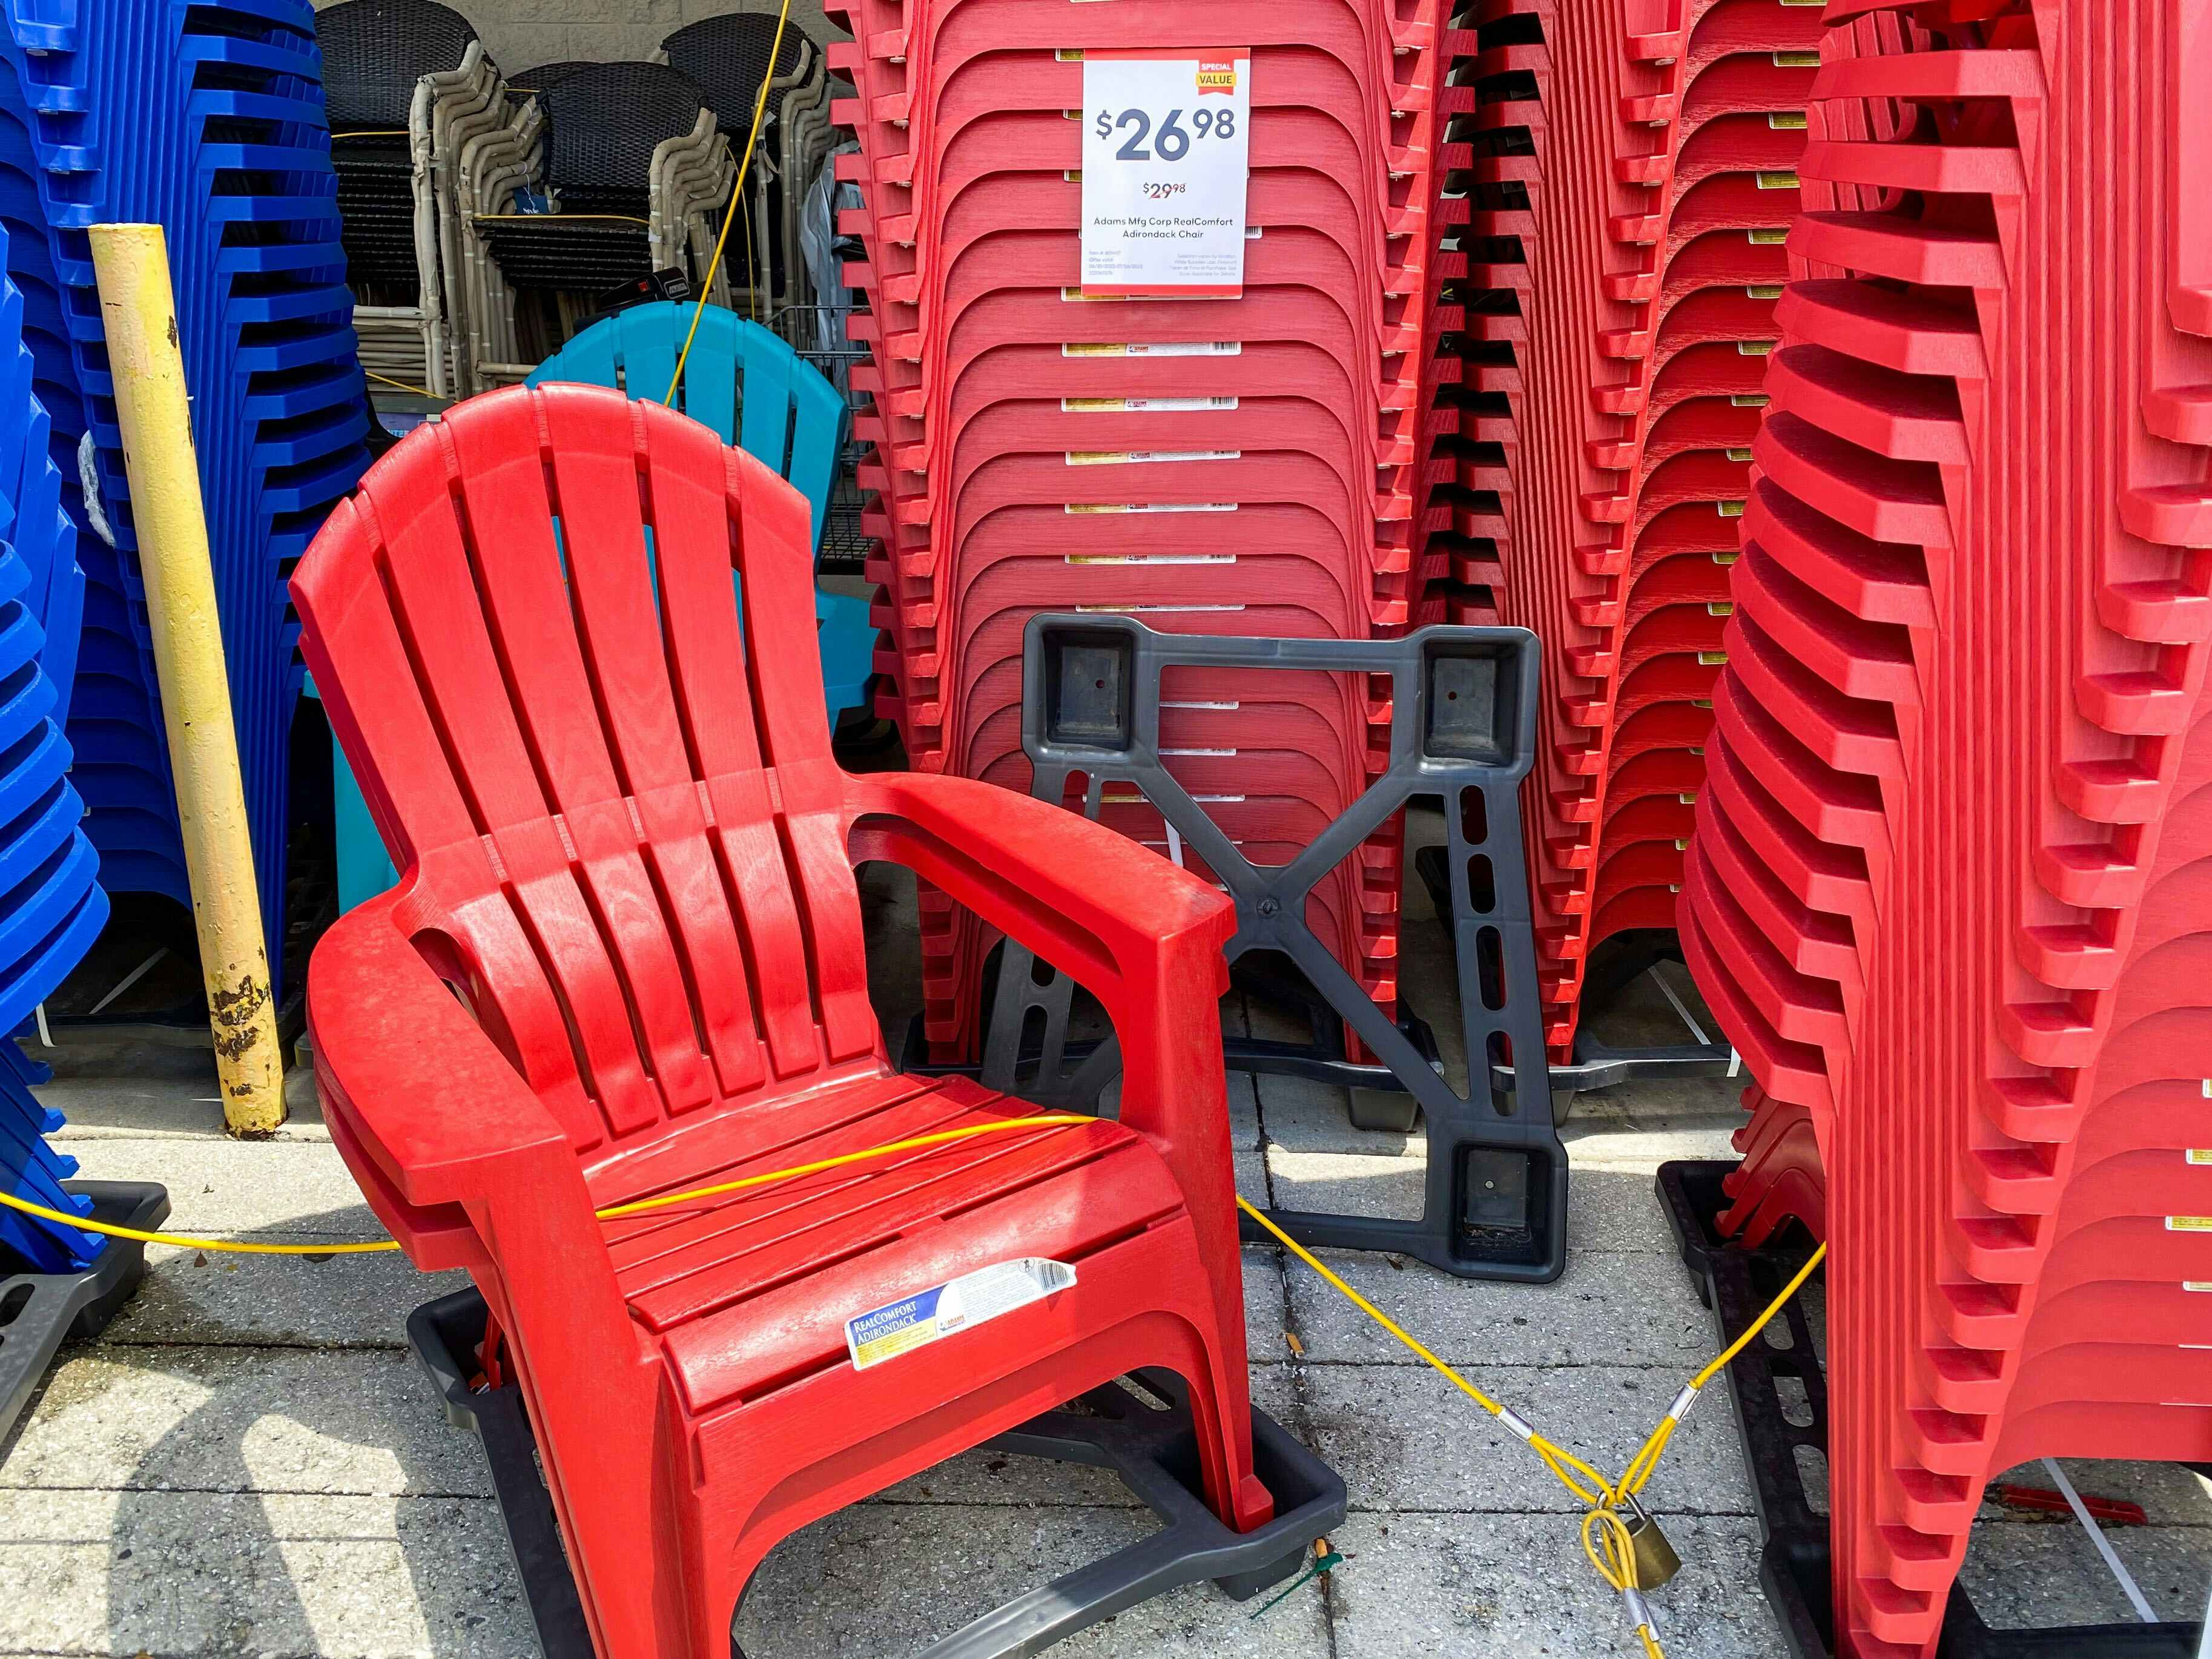 plastic adirondack chairs on sale at Lowe's